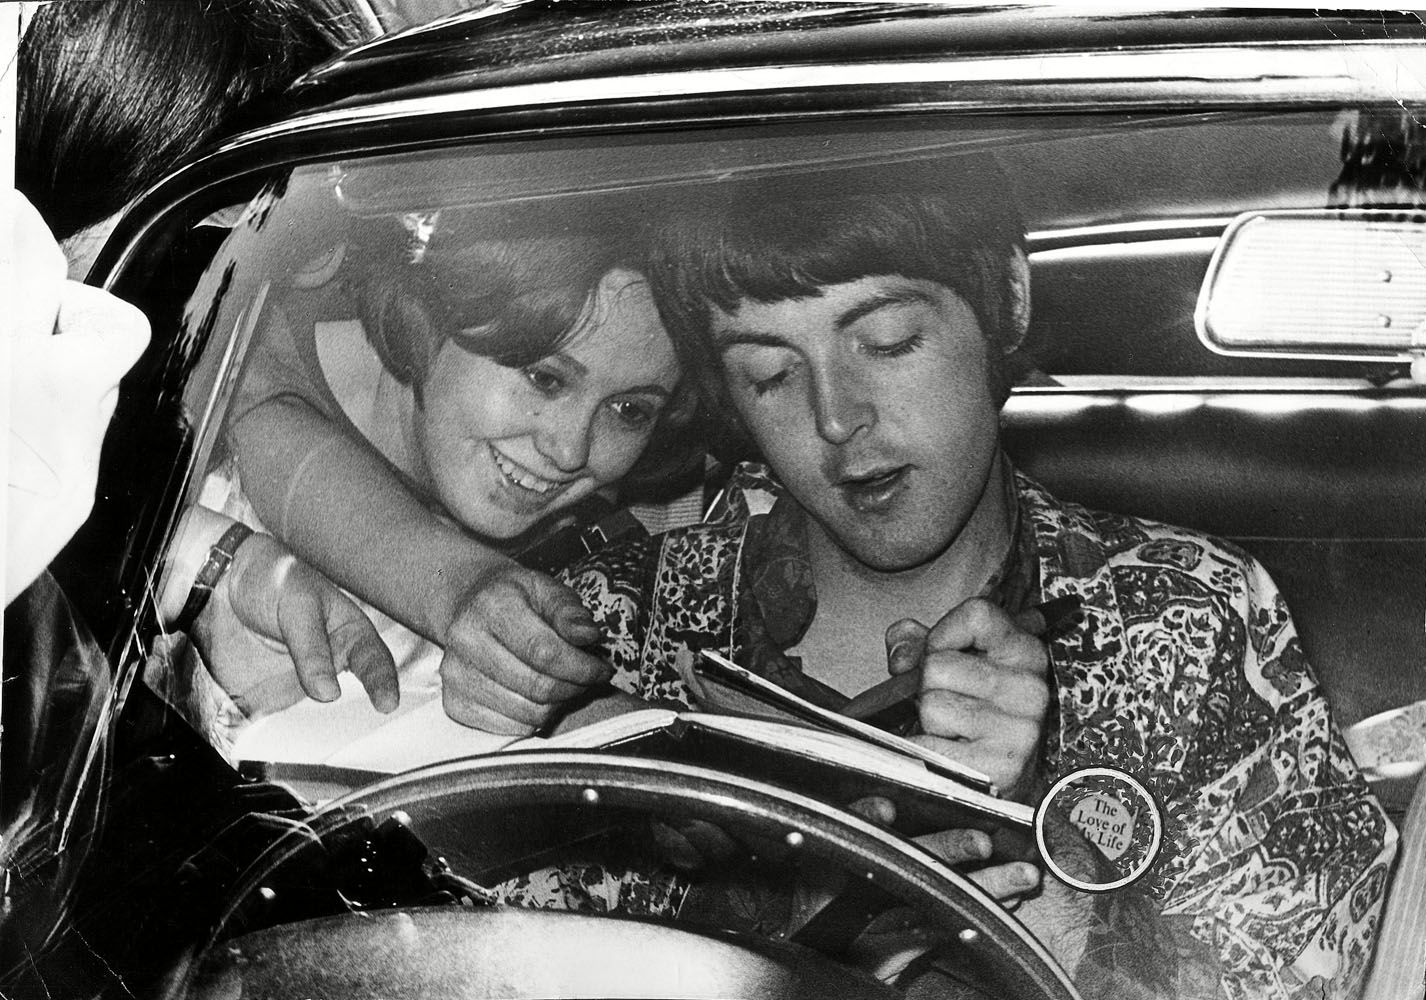 Paul McCartney signs autographs for fans whilst sat in his Aston Martin car outside his flat in St John's Wood. He has a badge on his shirt which reads 'The Love Of My Life'. London, England, 1967. (In this photo, the circle highlighting the badge was made by a prior media source)